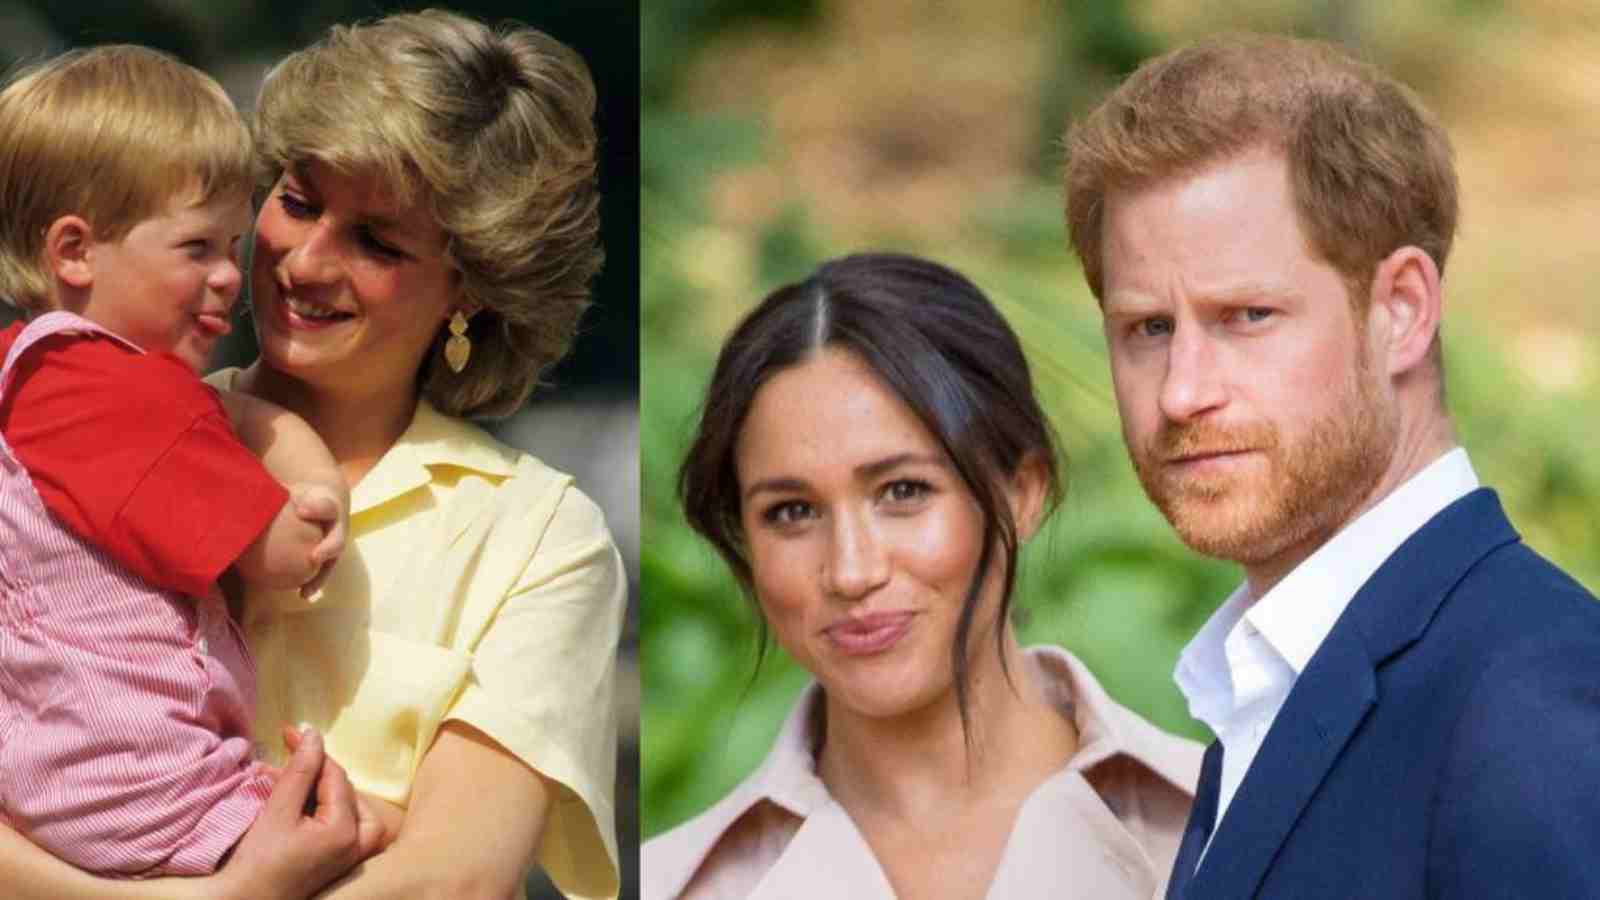 Princess Diana would have been unhappy about Meghan Markle breaking Prince Harry's ties with his family